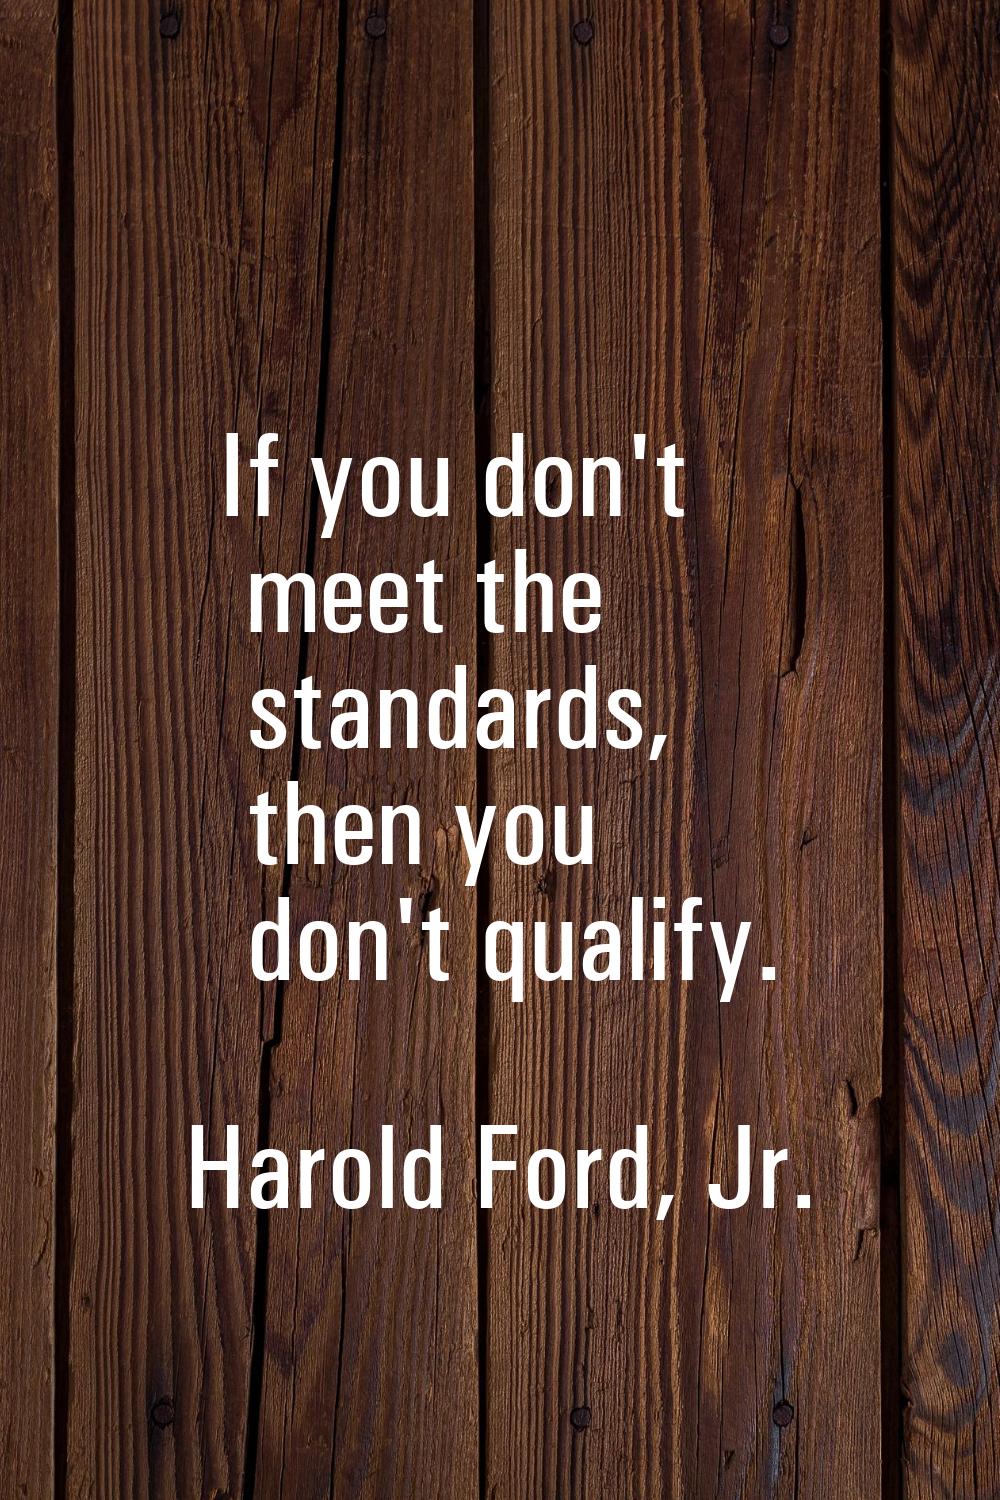 If you don't meet the standards, then you don't qualify.